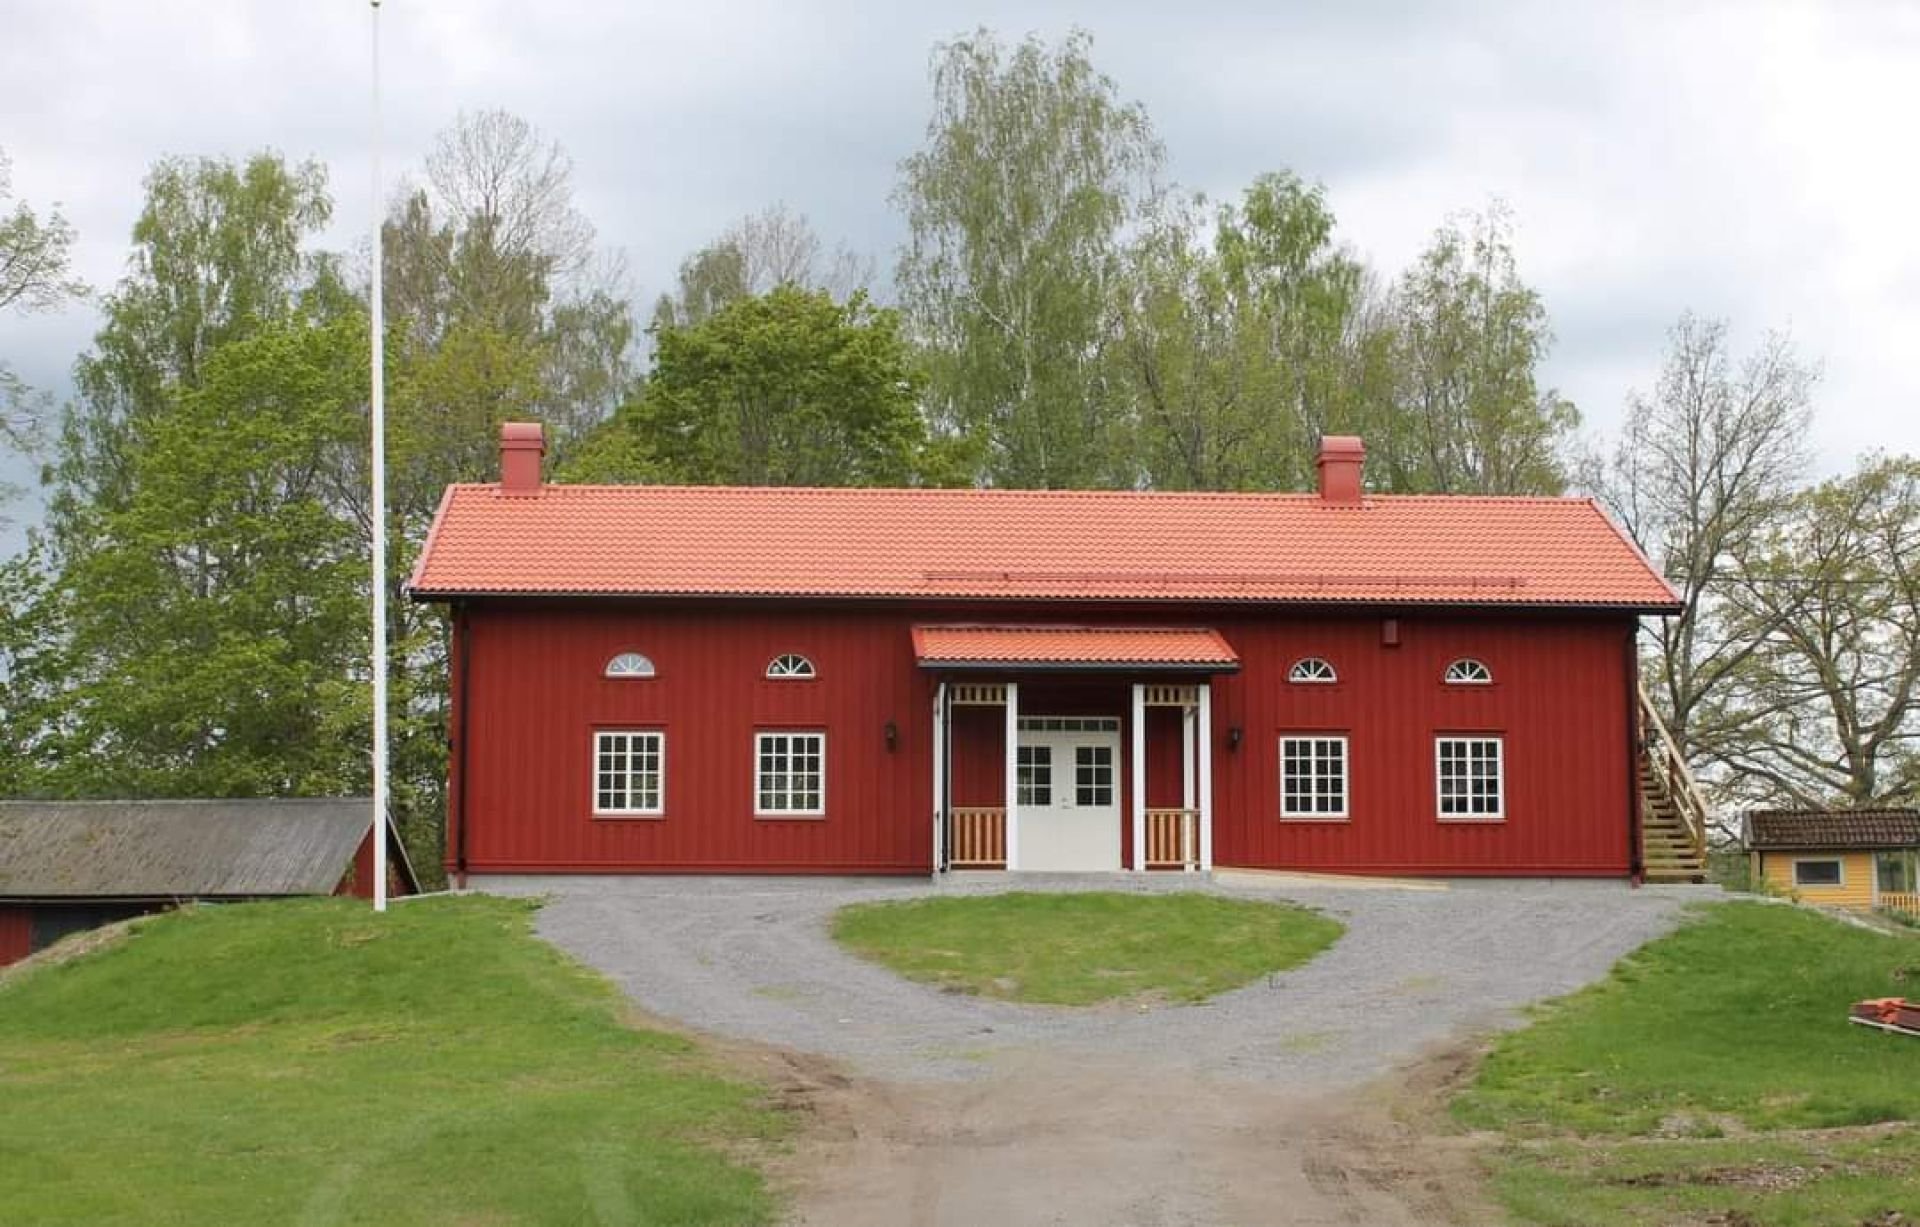 The main building itself, the "Mangårdsbyggnaden" is higher up than the other buildings on the farm.